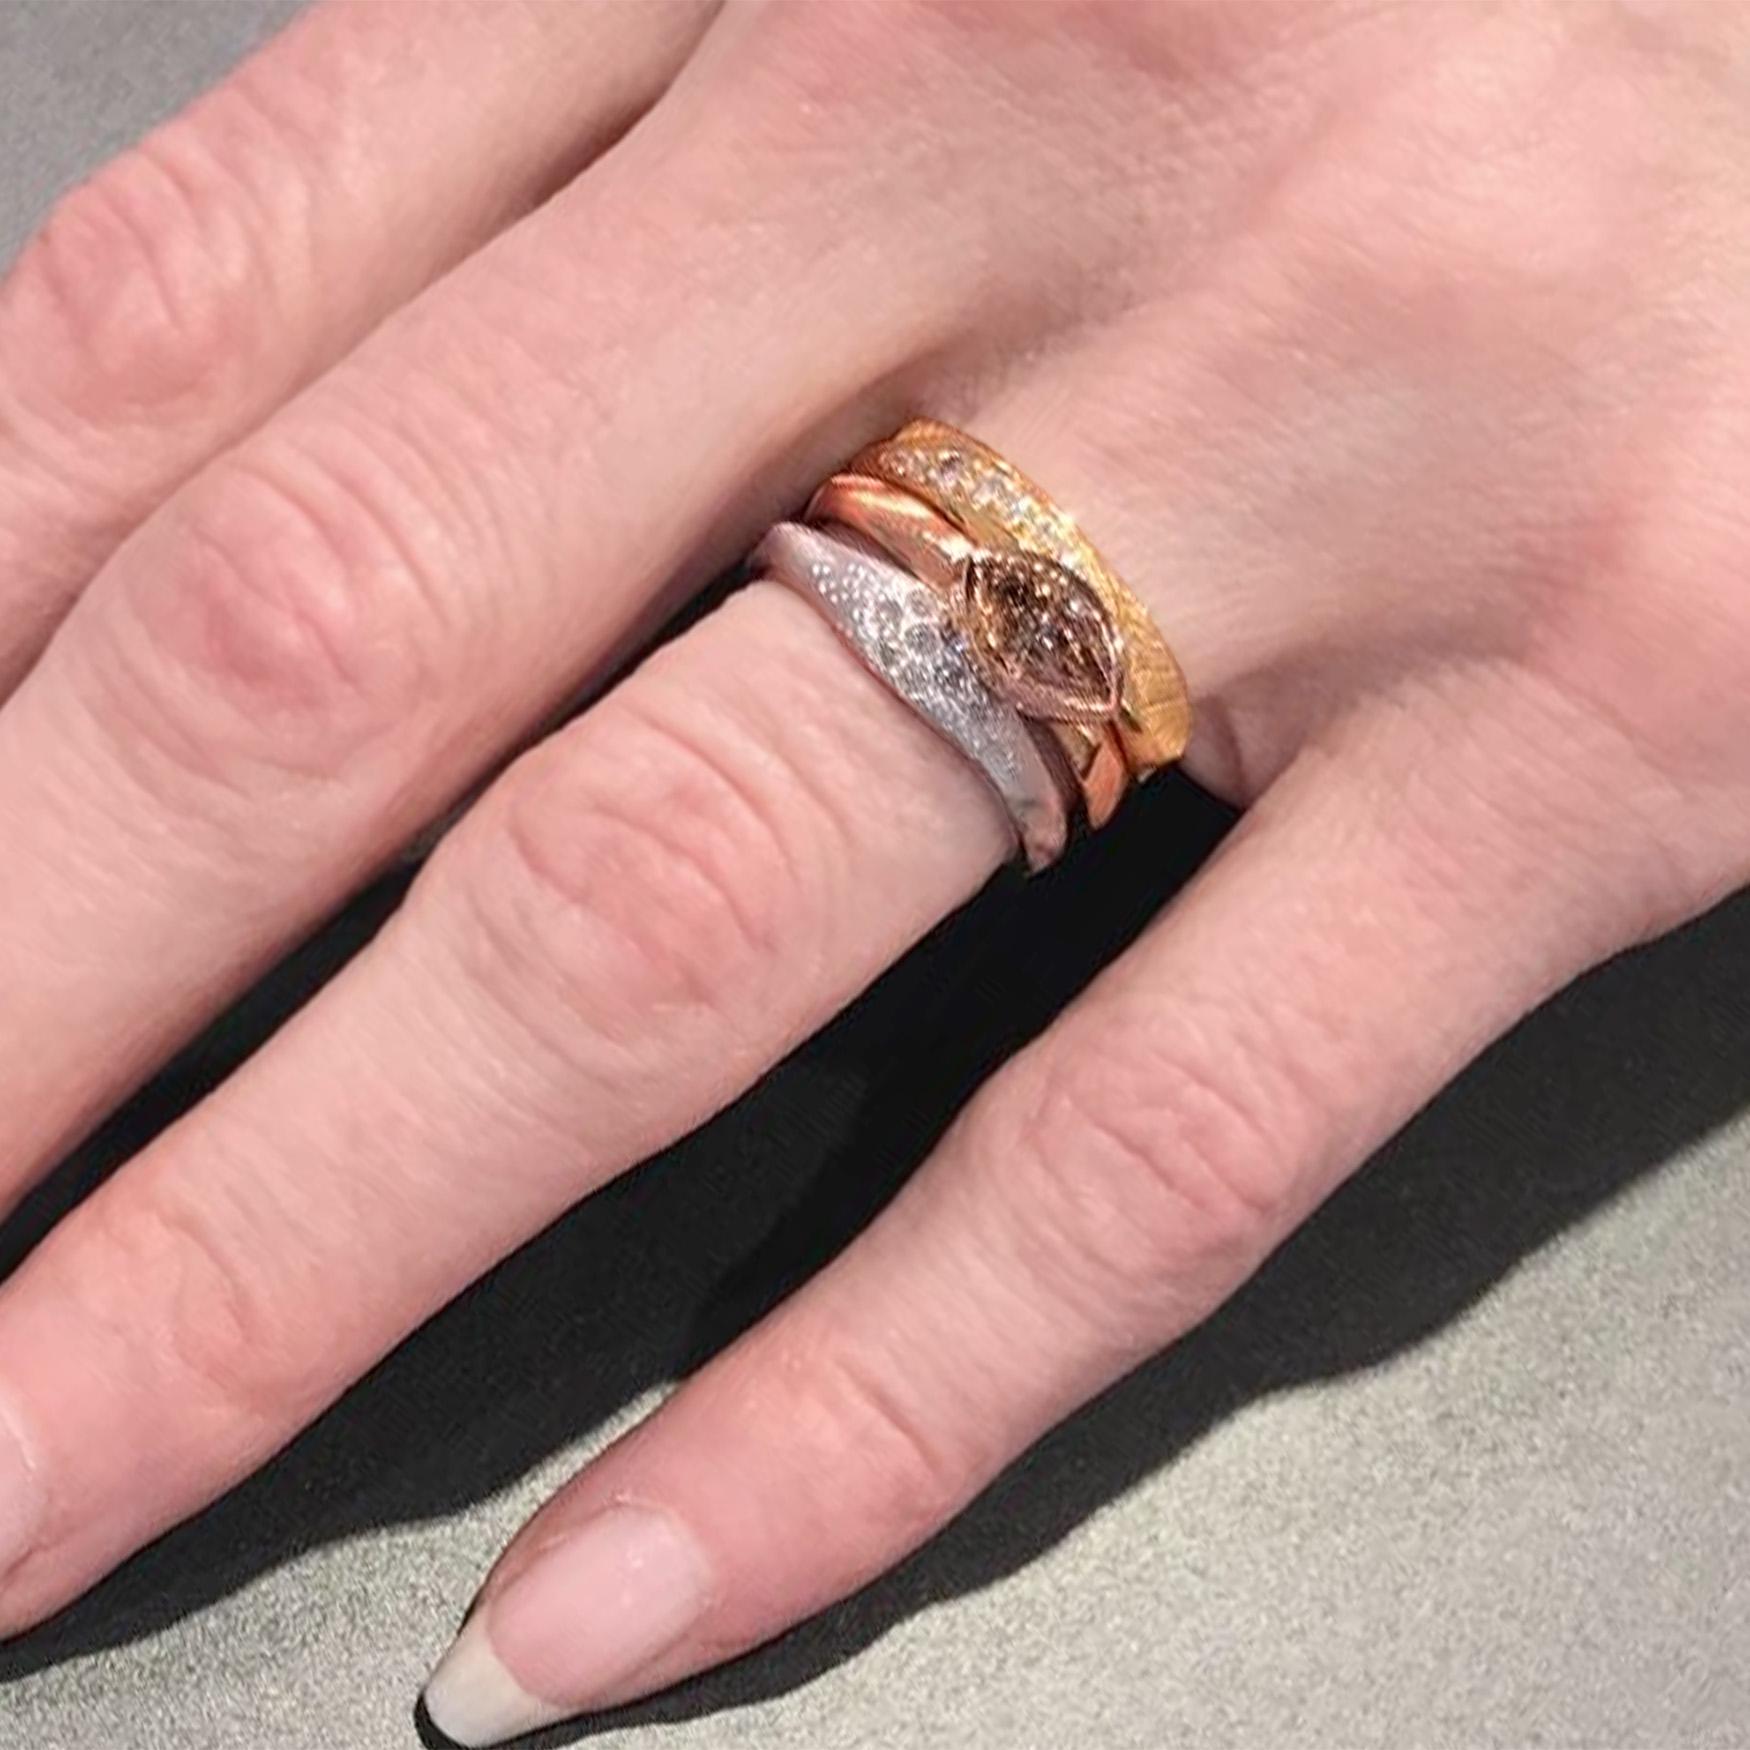 Fit for nobility, K.Mita’s Marquesa ring is made from 18k rose gold and a marquise shaped 0.51ct Brown Diamond (SI). The width of the shank is only 2.8mm, but around the stone setting it is 6.0mm. Handmade to order in 10-14 days. Available in US